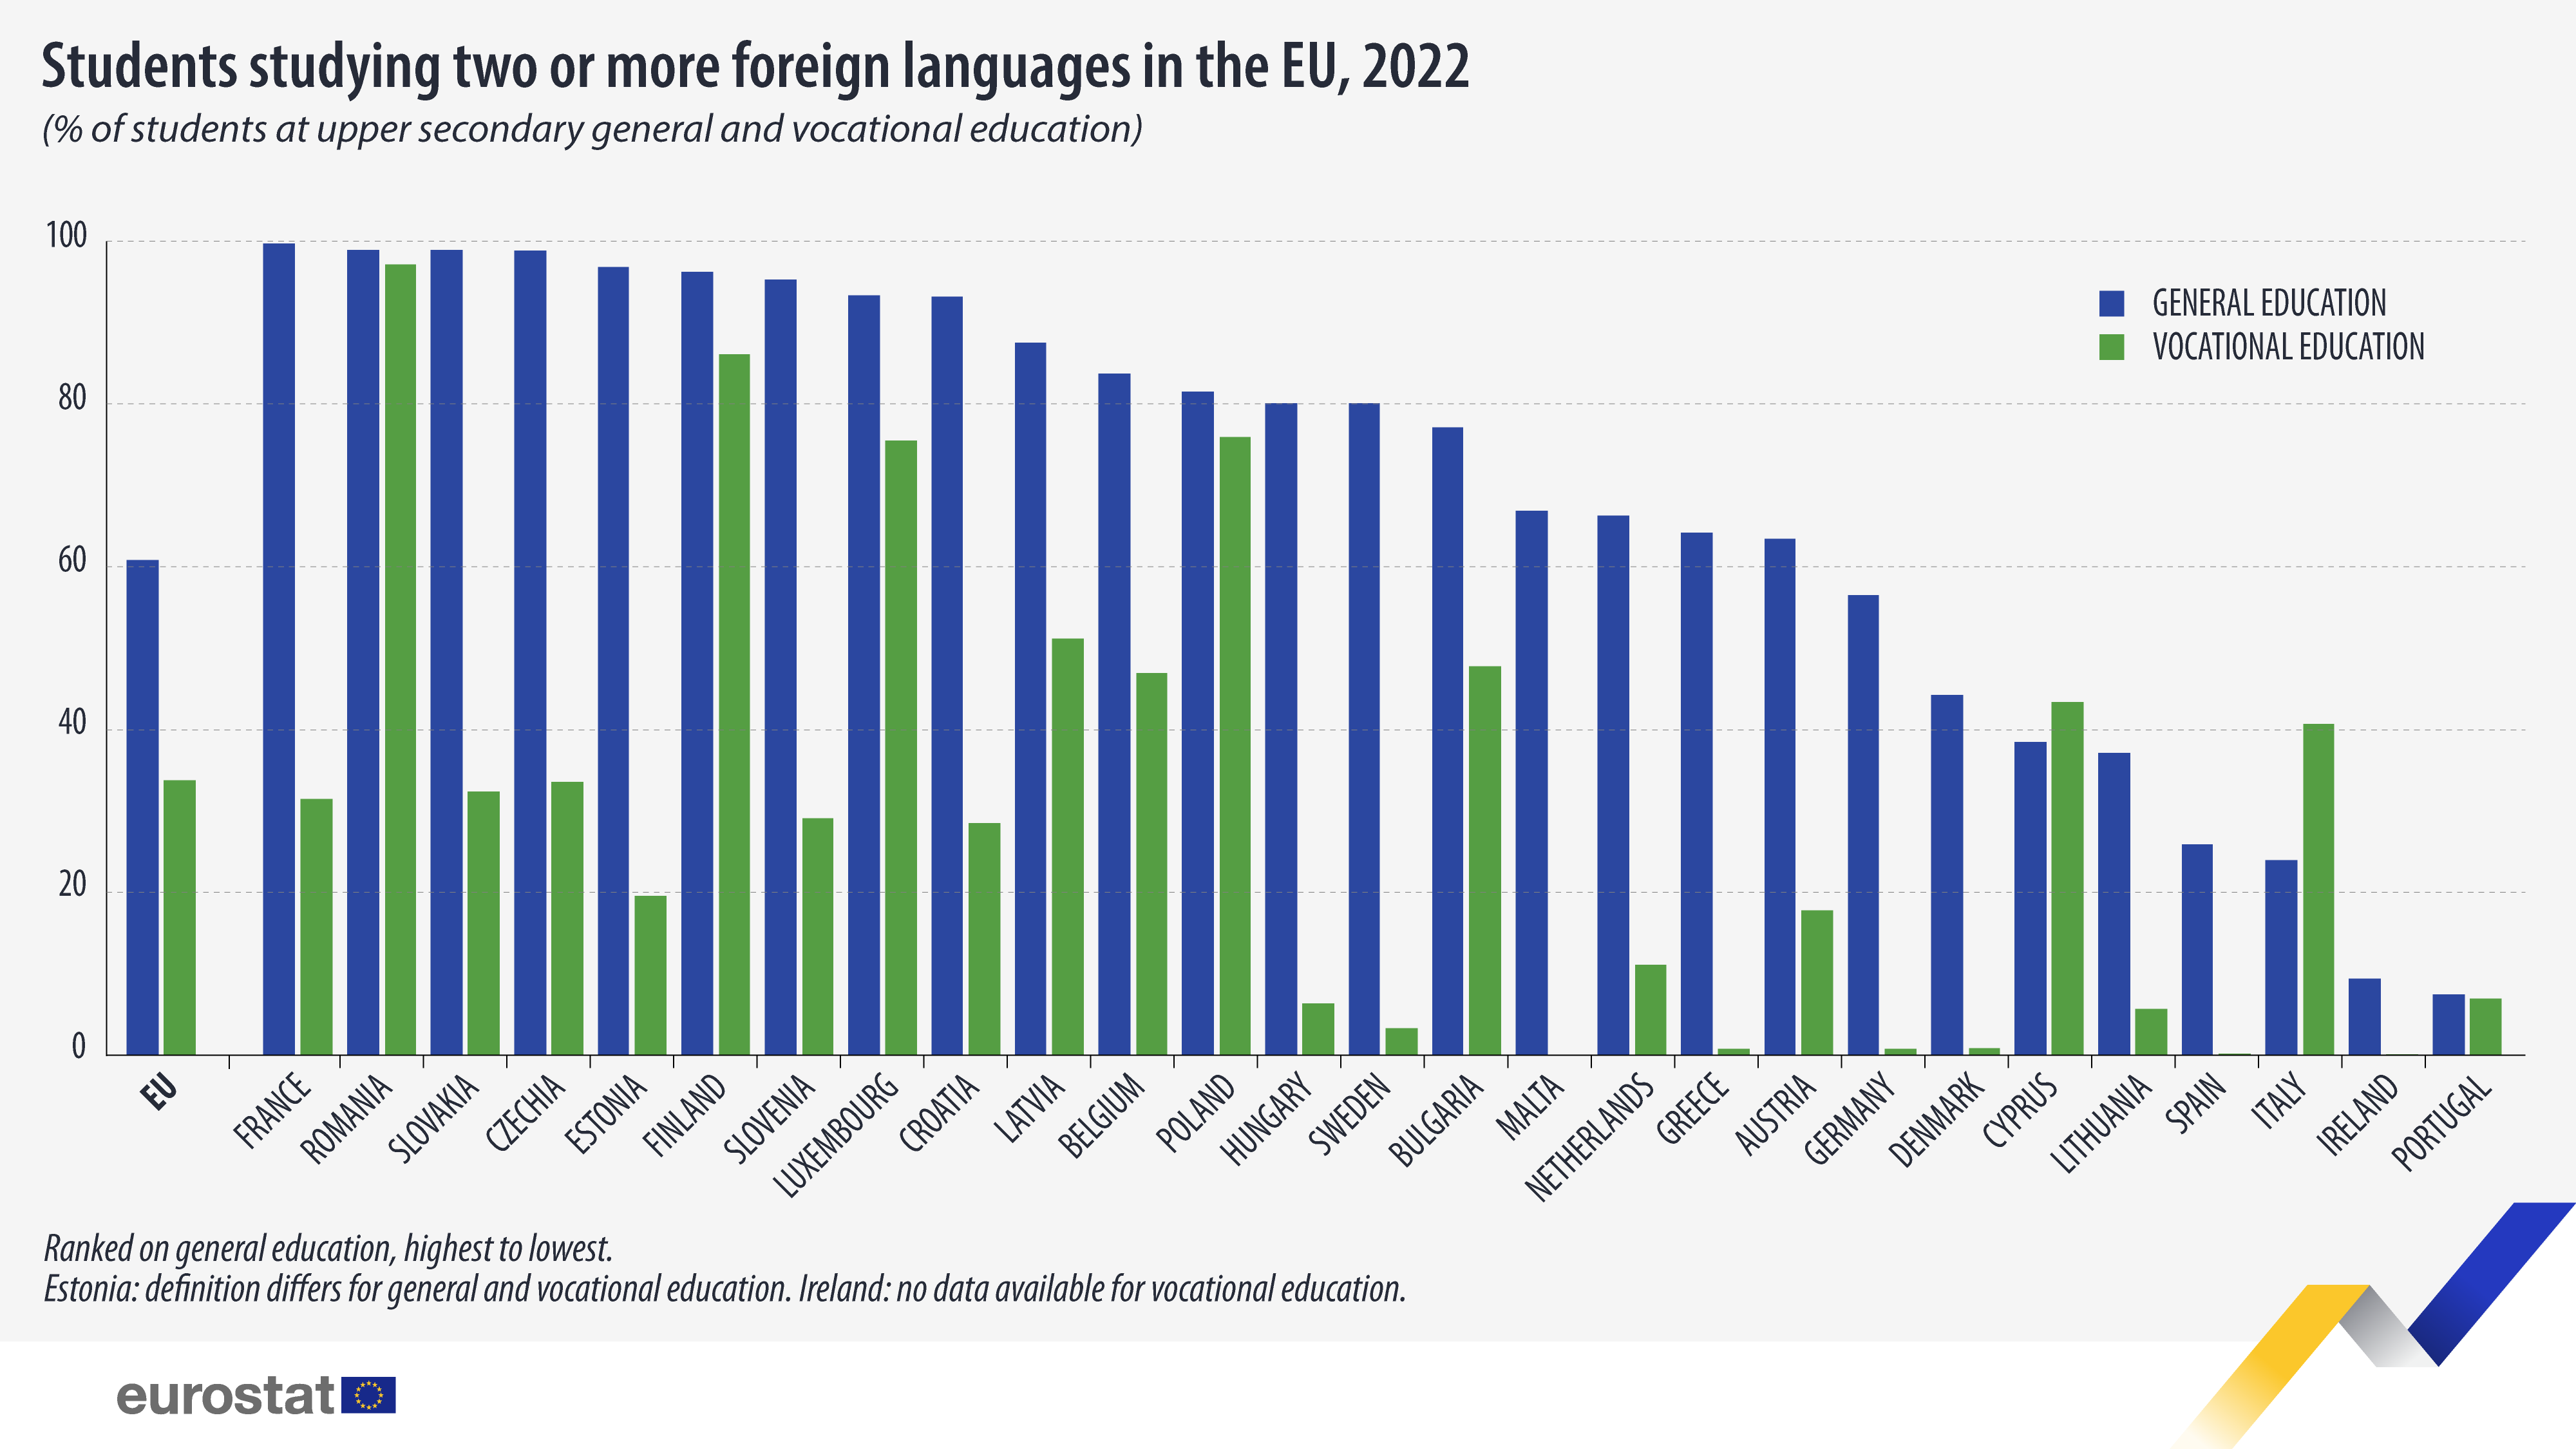 Students studying two or more foreign languages in the EU, 2022 in percentage of students at upper secondary general and vocational education. Bar chart. See link to full dataset below.